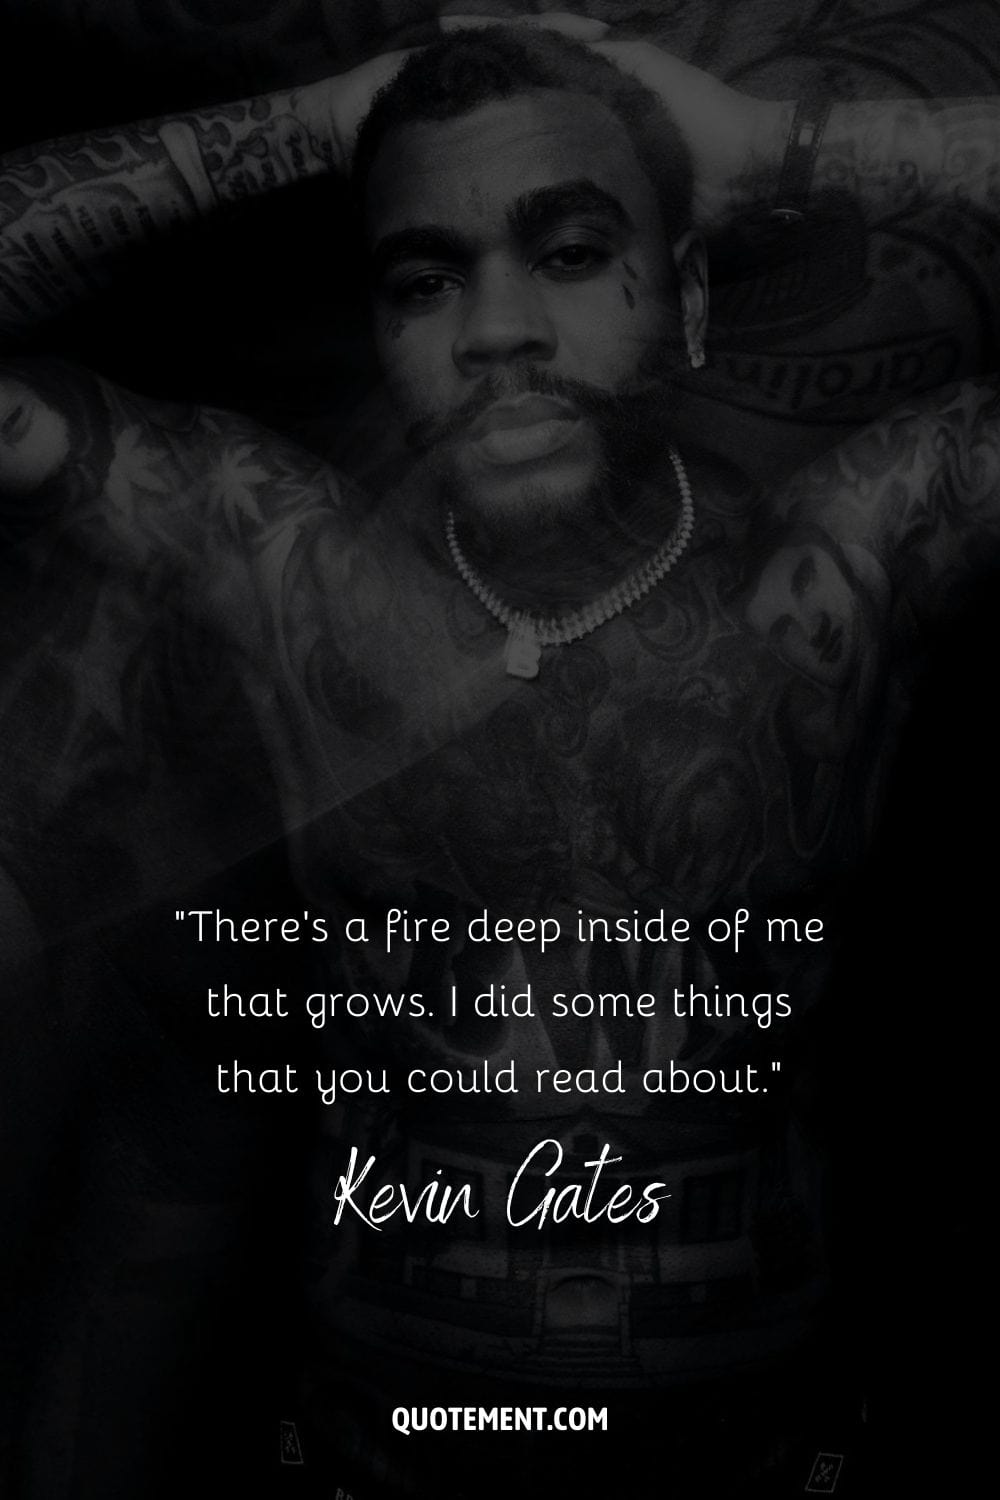 “There's a fire deep inside of me that grows. I did some things that you could read about.” – Kevin Gates